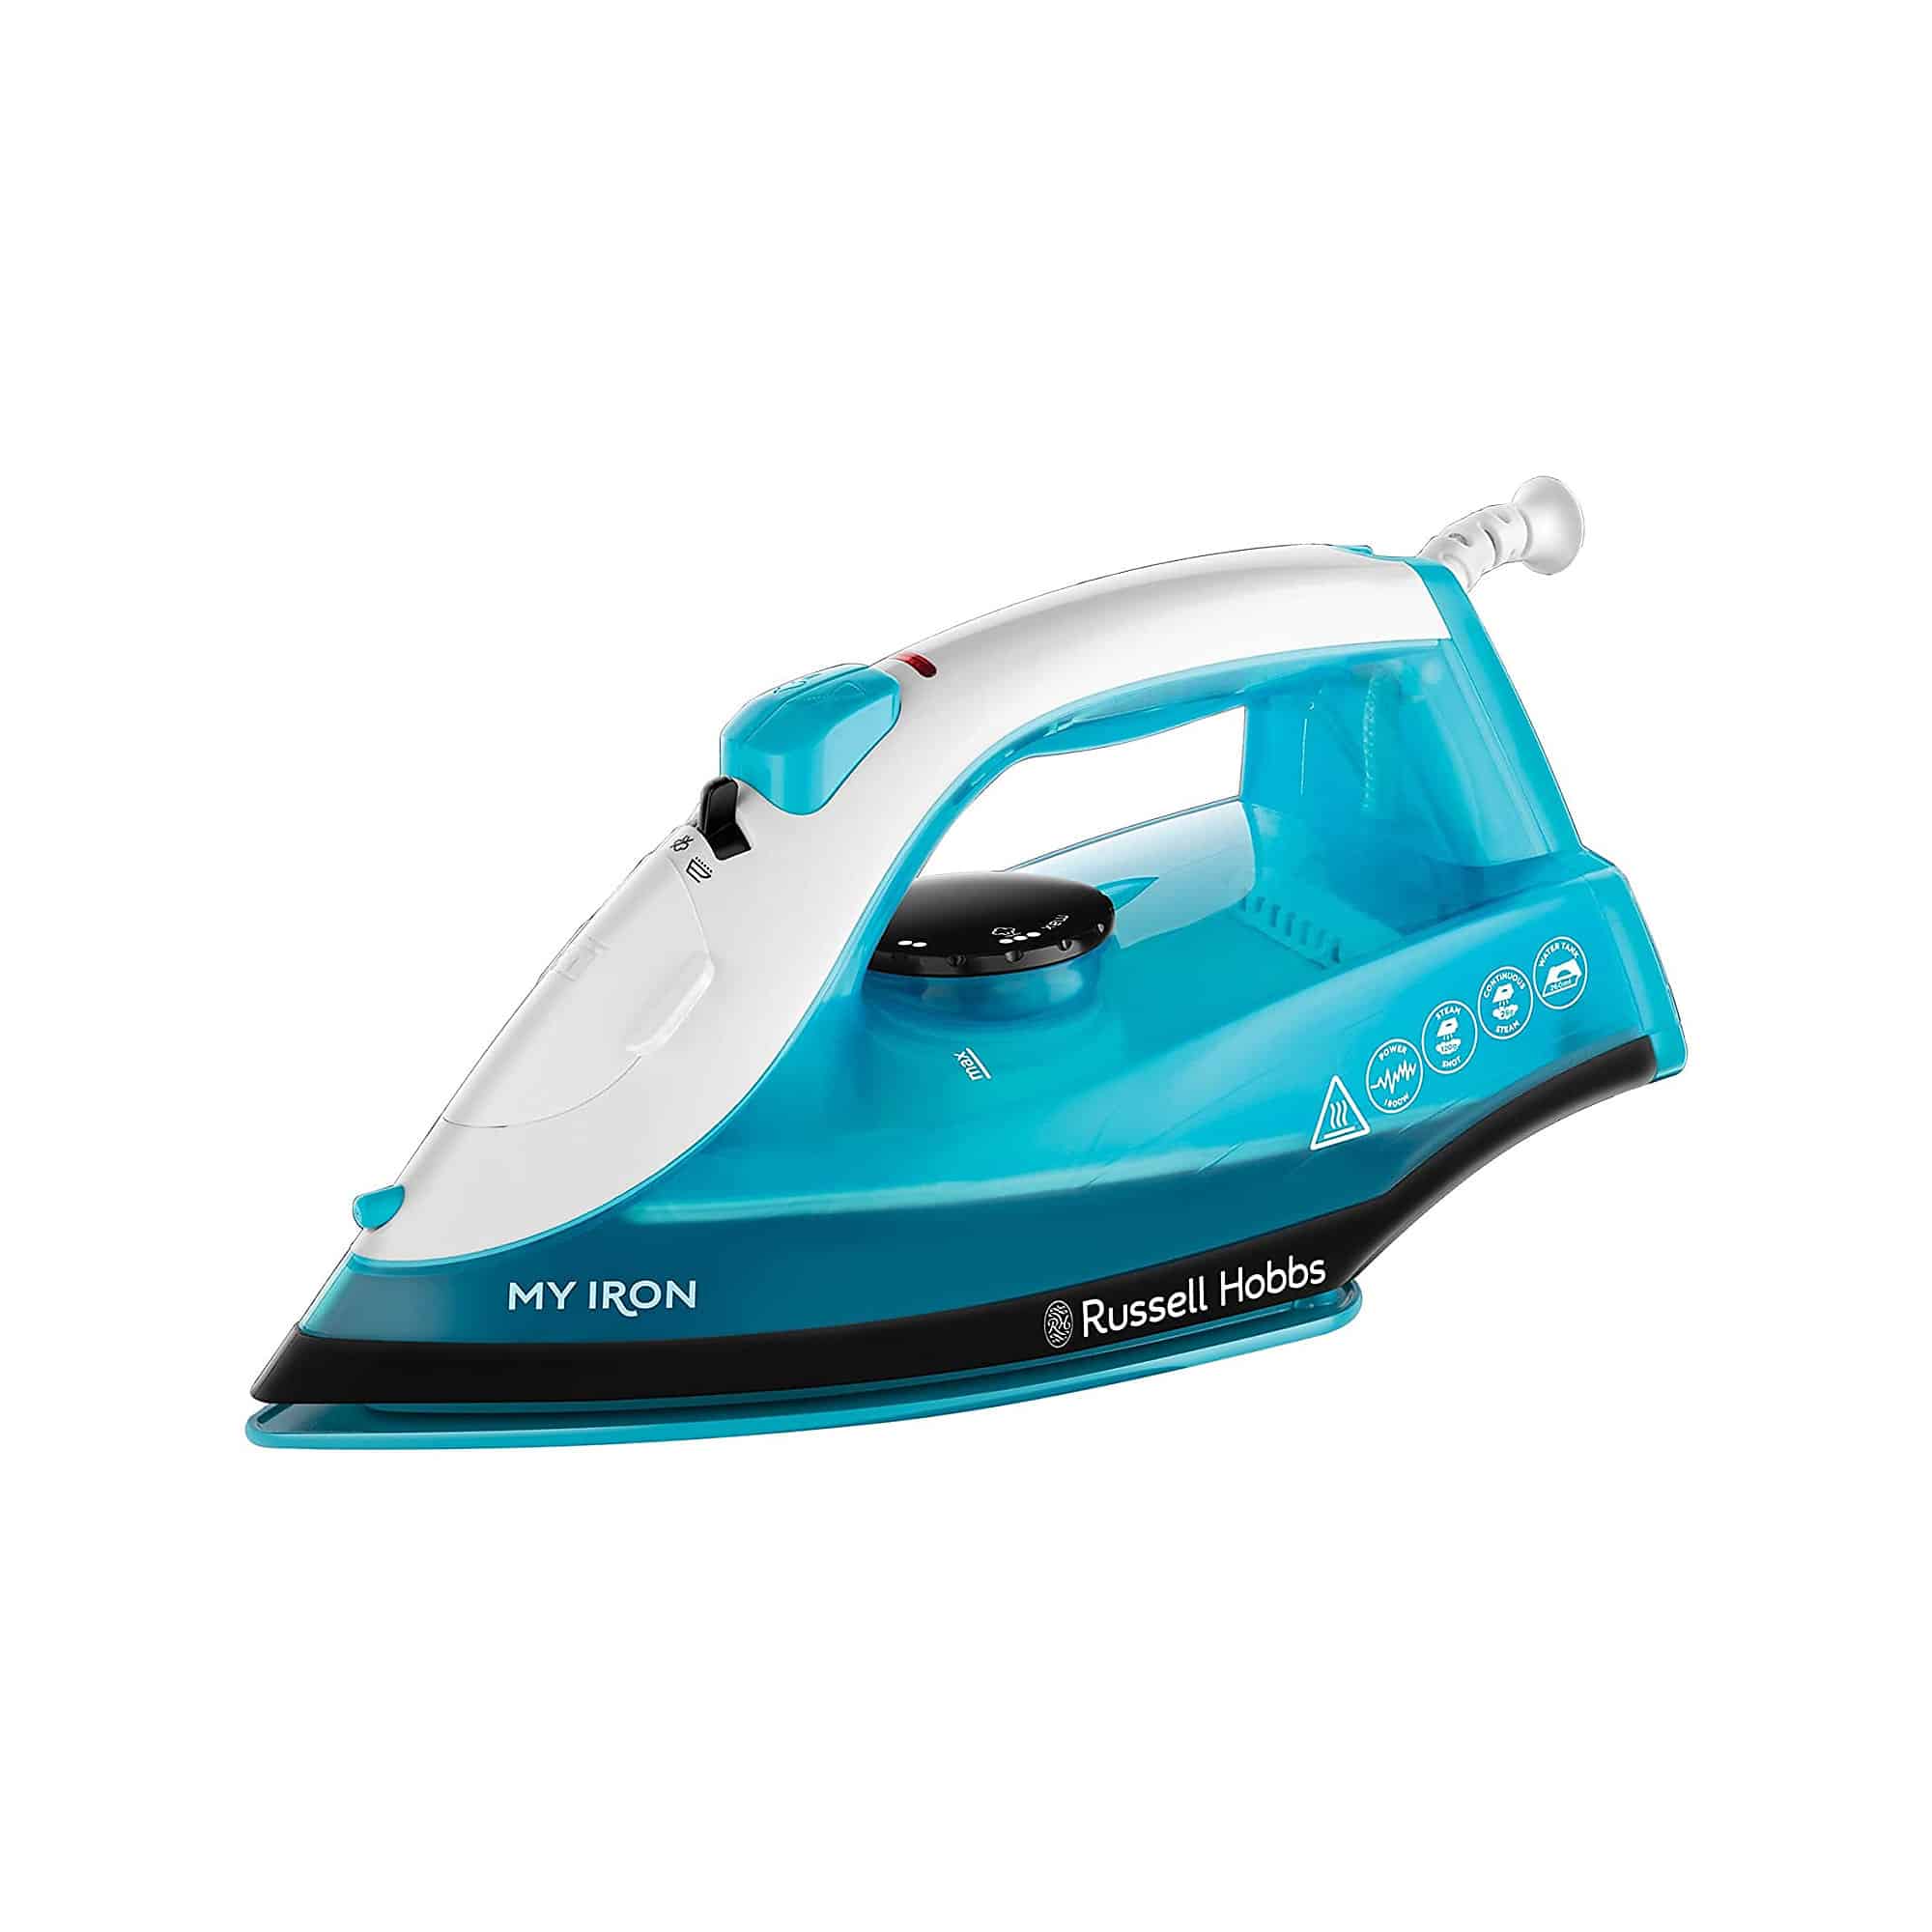 Russell Hobbs 25580 My Iron Steam Iron 1800W, 0.26L Water Tank - Blue and White-0175